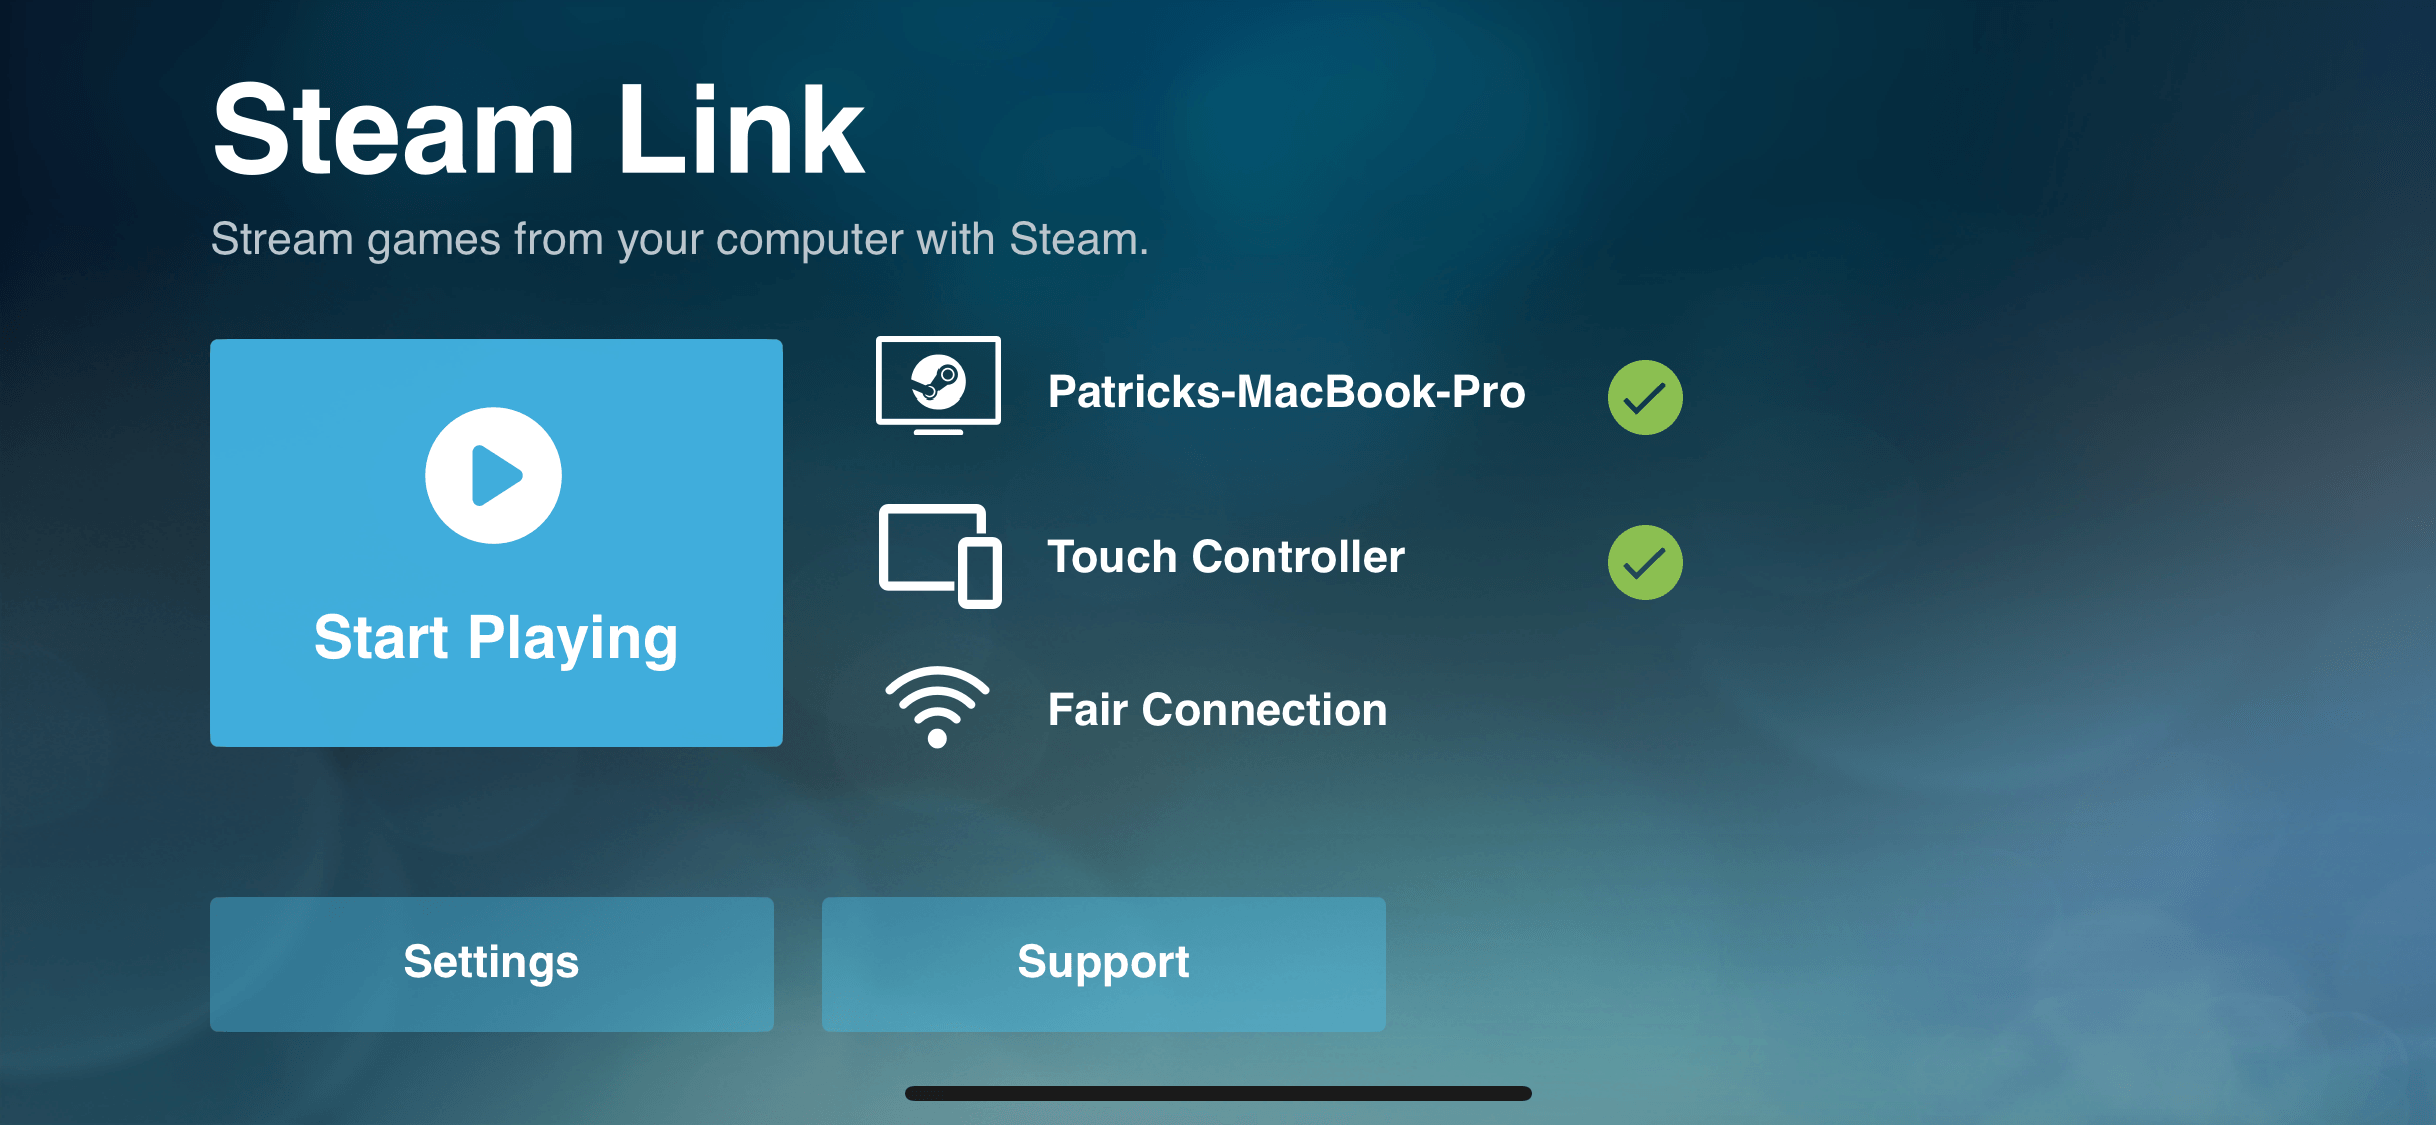 How To Set Up Steam Link To Stream Games